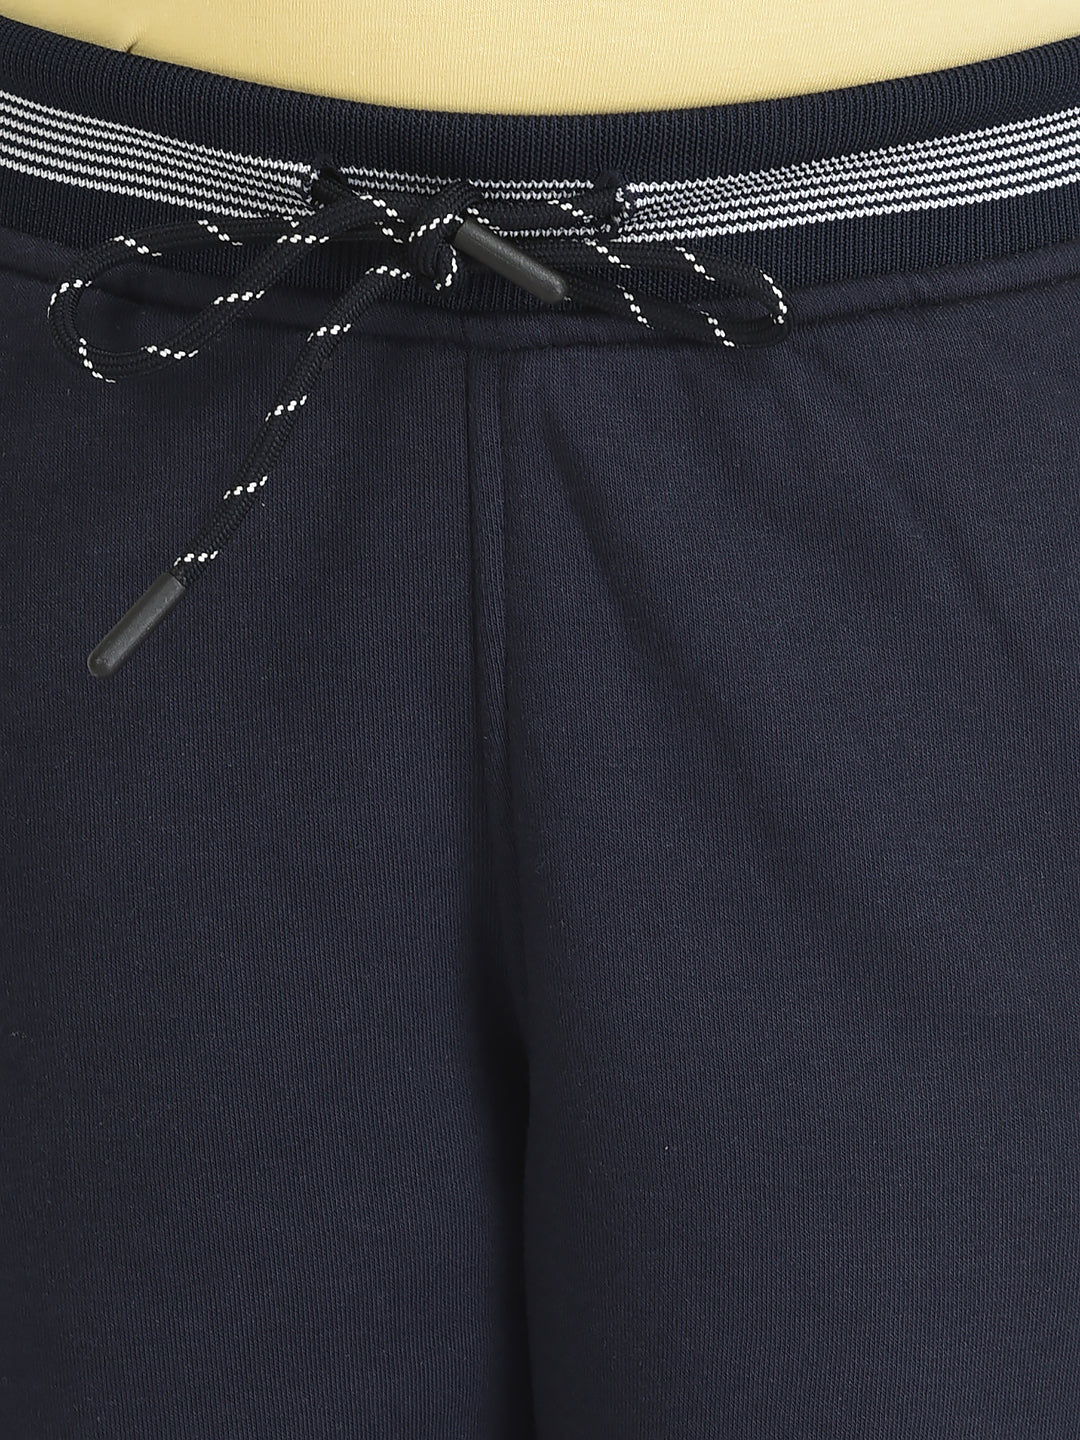 Navy Blue Track Pants with Typographic Detailing 